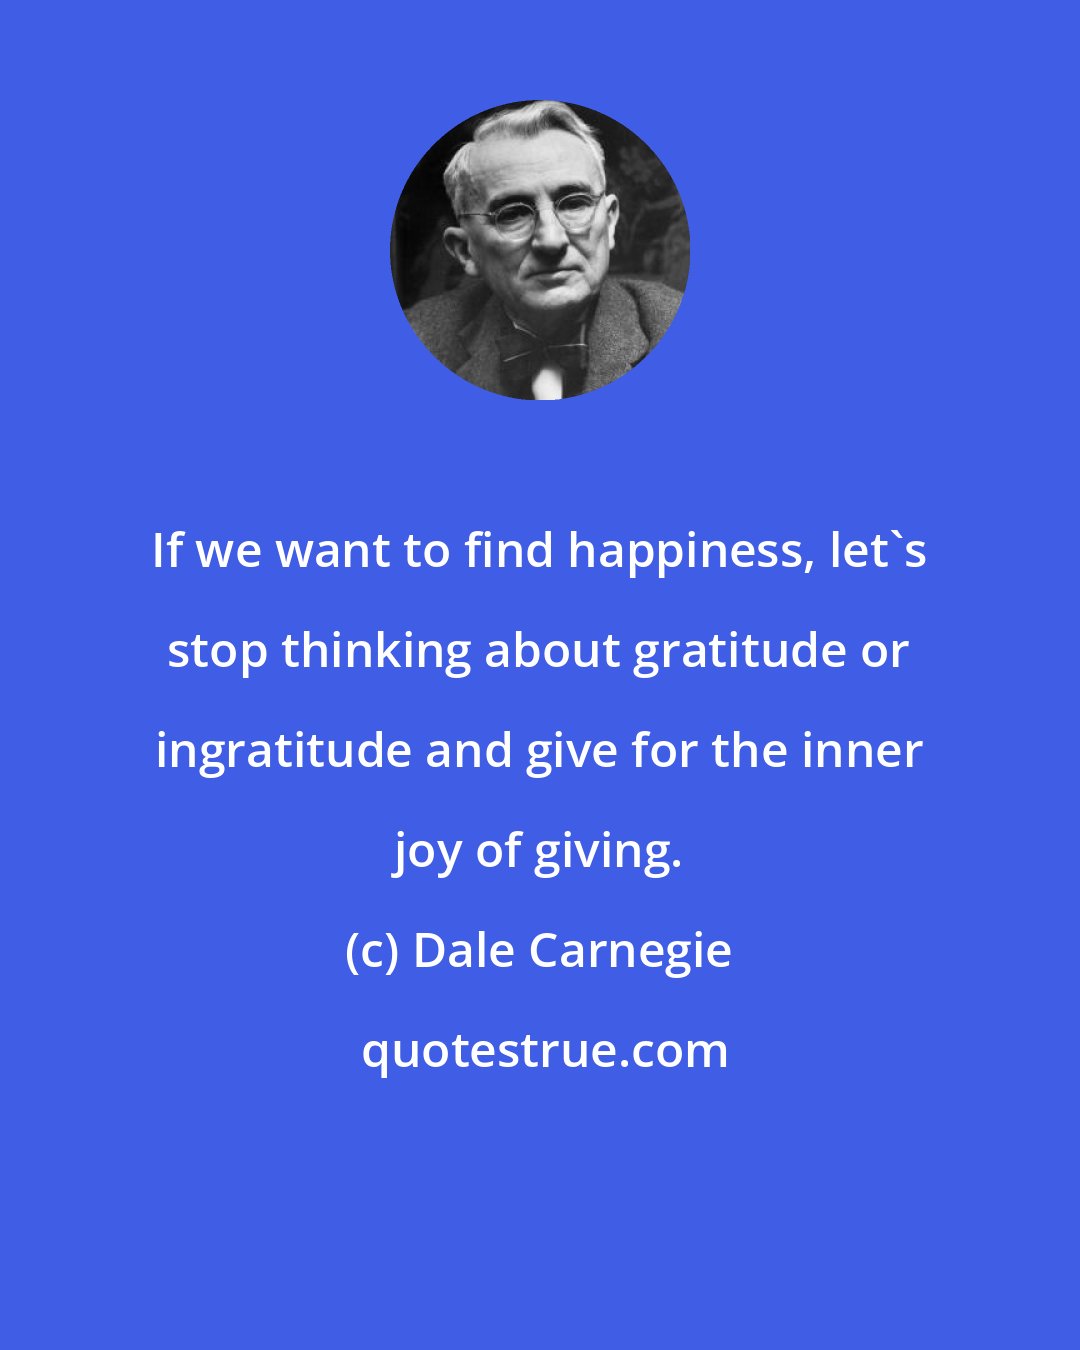 Dale Carnegie: If we want to find happiness, let's stop thinking about gratitude or ingratitude and give for the inner joy of giving.